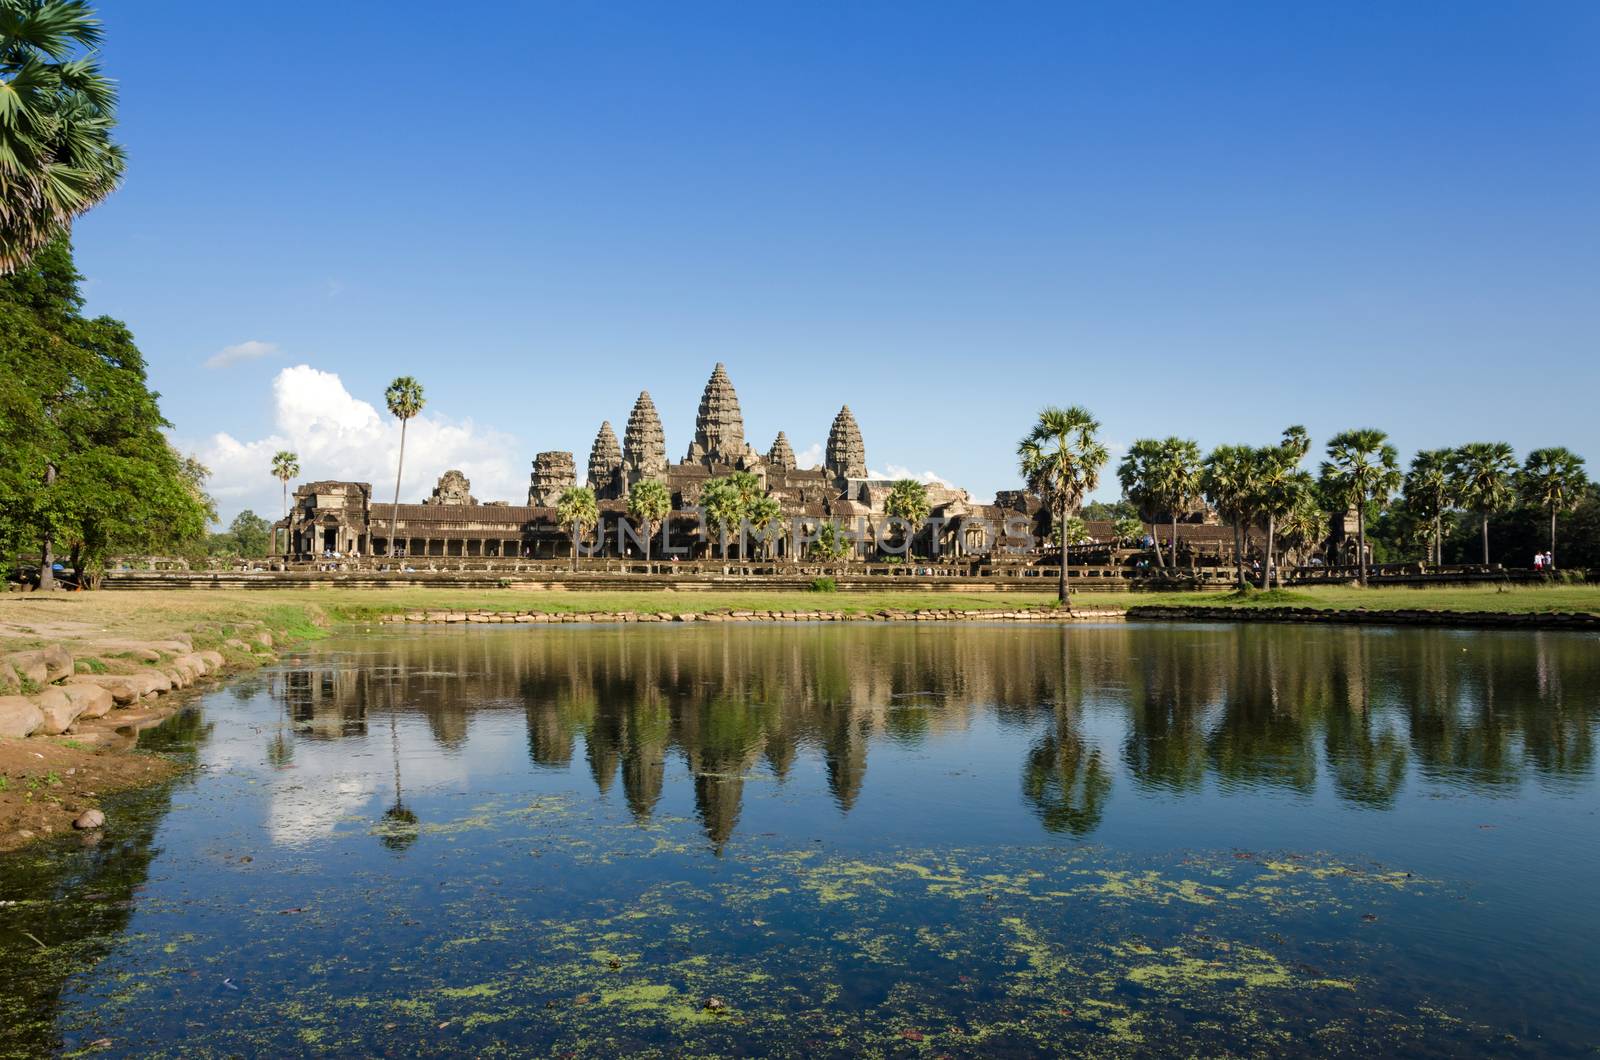 Angkor Wat with reflection in water in Cambodia